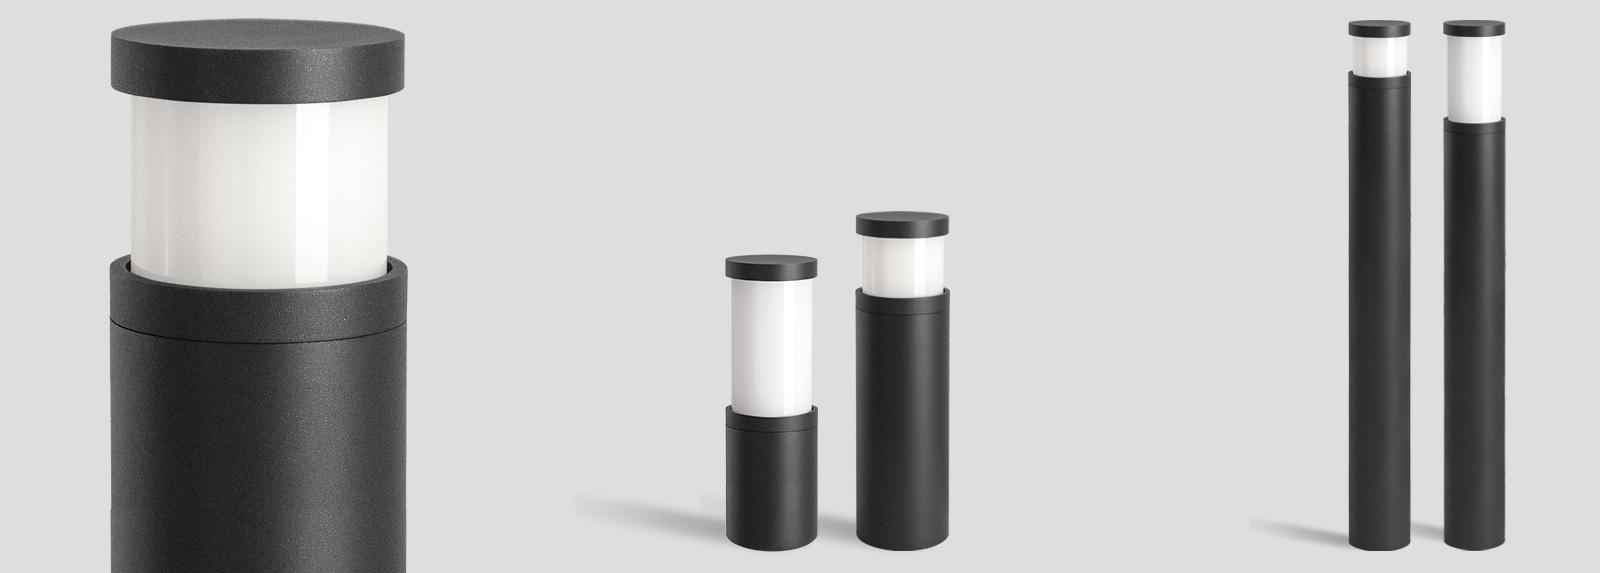 UNEDO 100 | IP66 bollards with opal diffuser